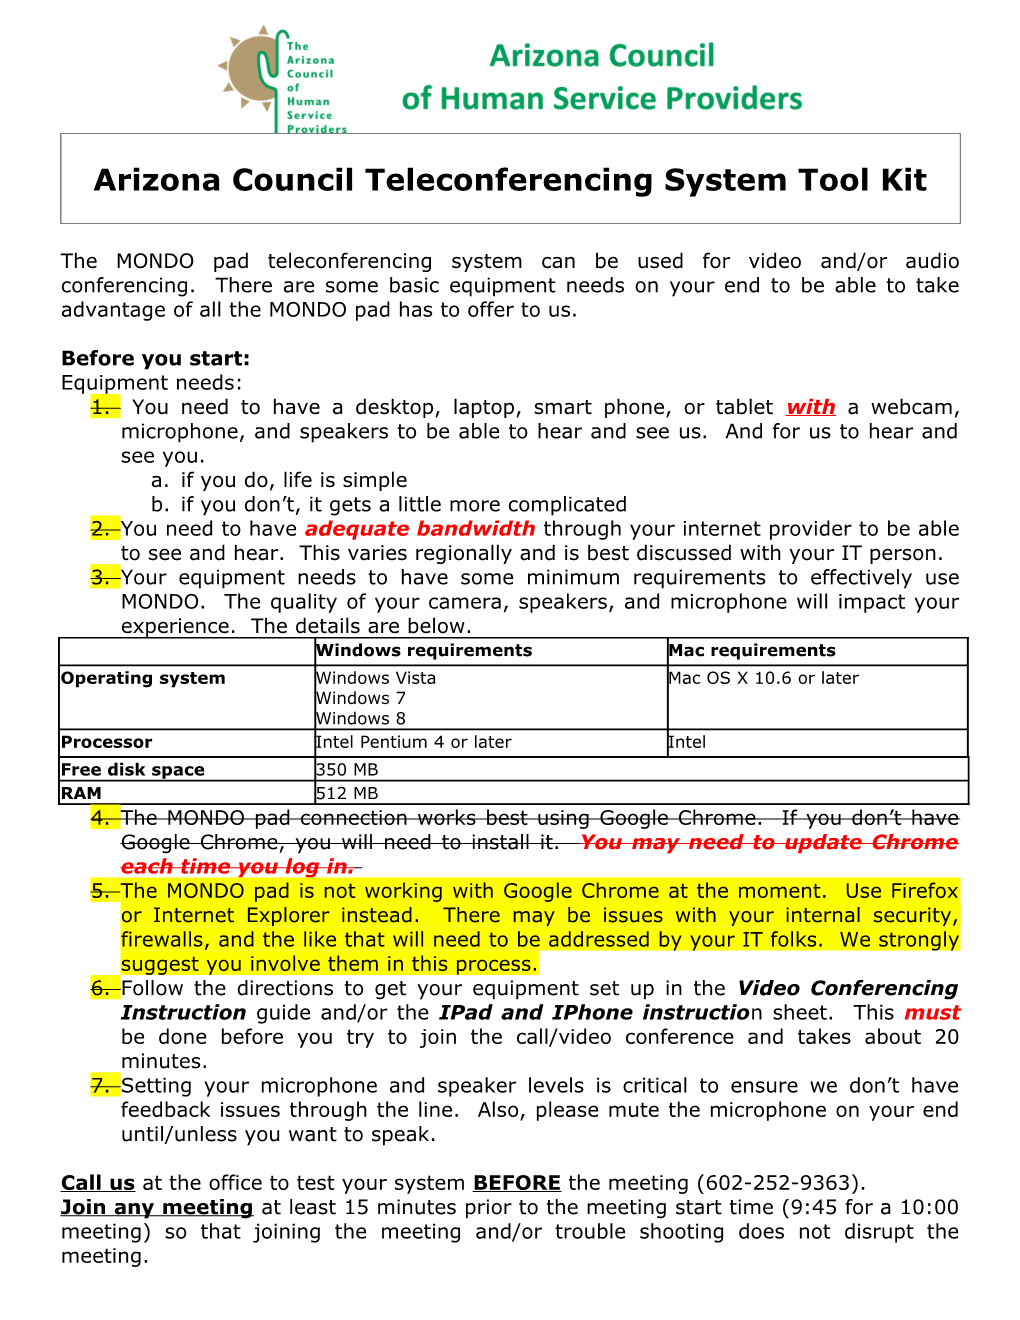 Arizona Council Teleconferencing System Tool Kit